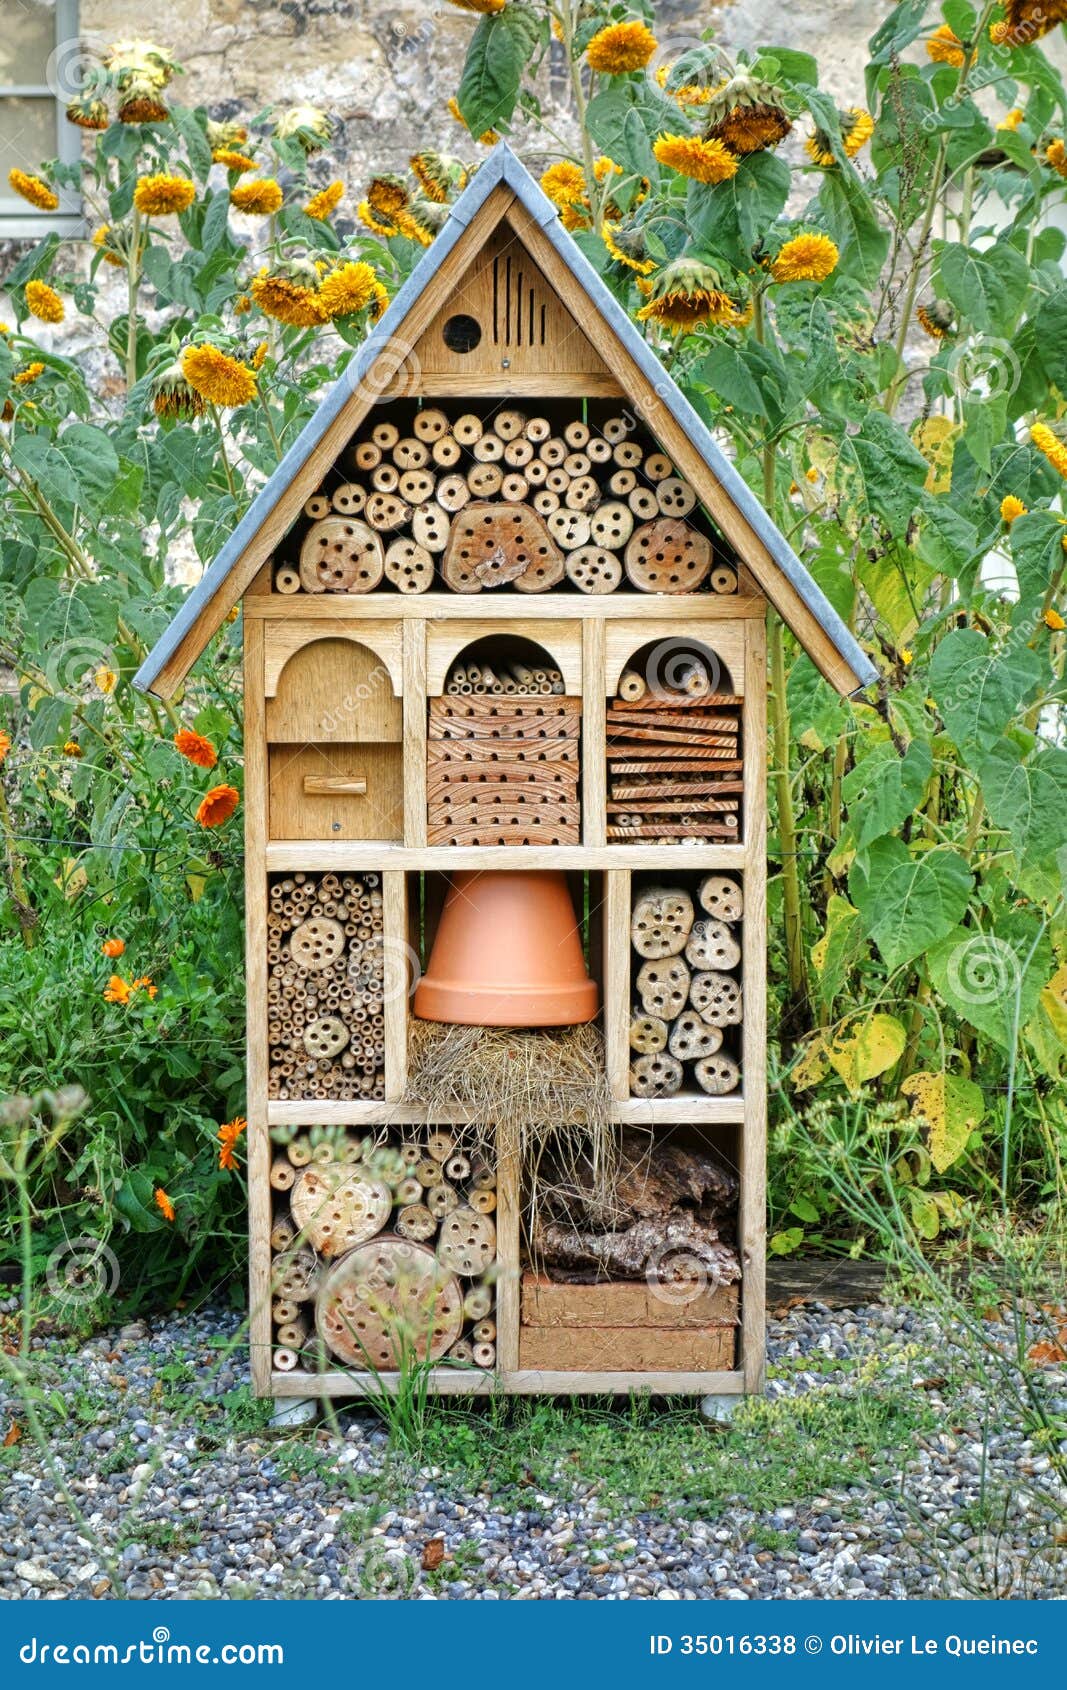 Craftsman built insect hotel decorative wood house with compartments 